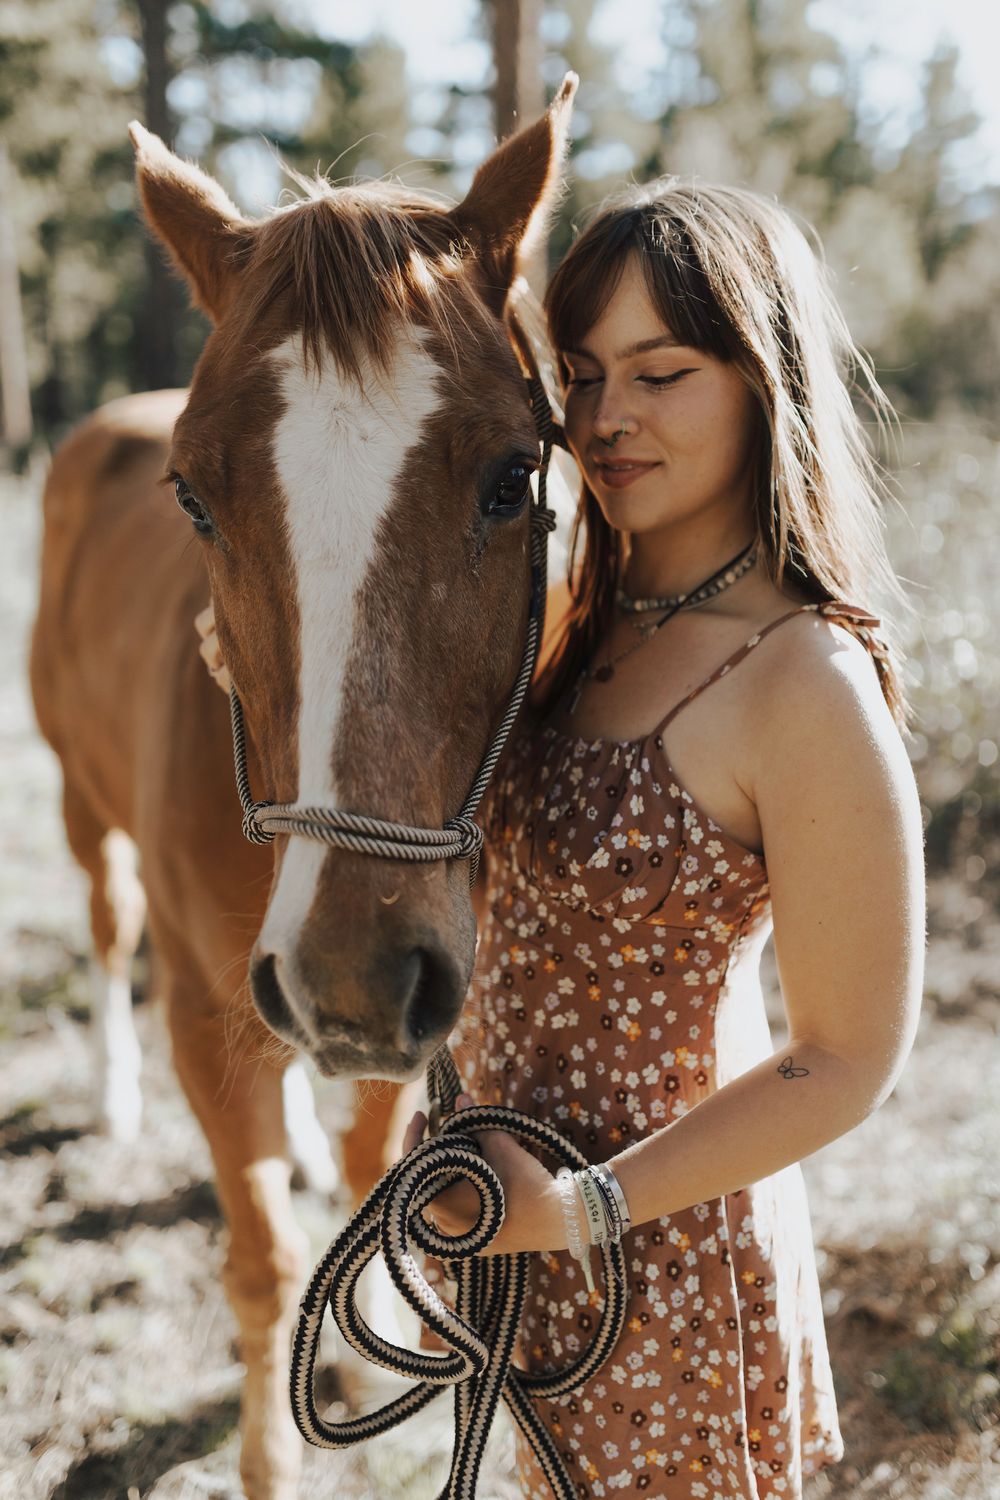 female holding horse in forest closing eyes during senior photo session wearing floral dress in reno nevada by katherine krakowski photographer